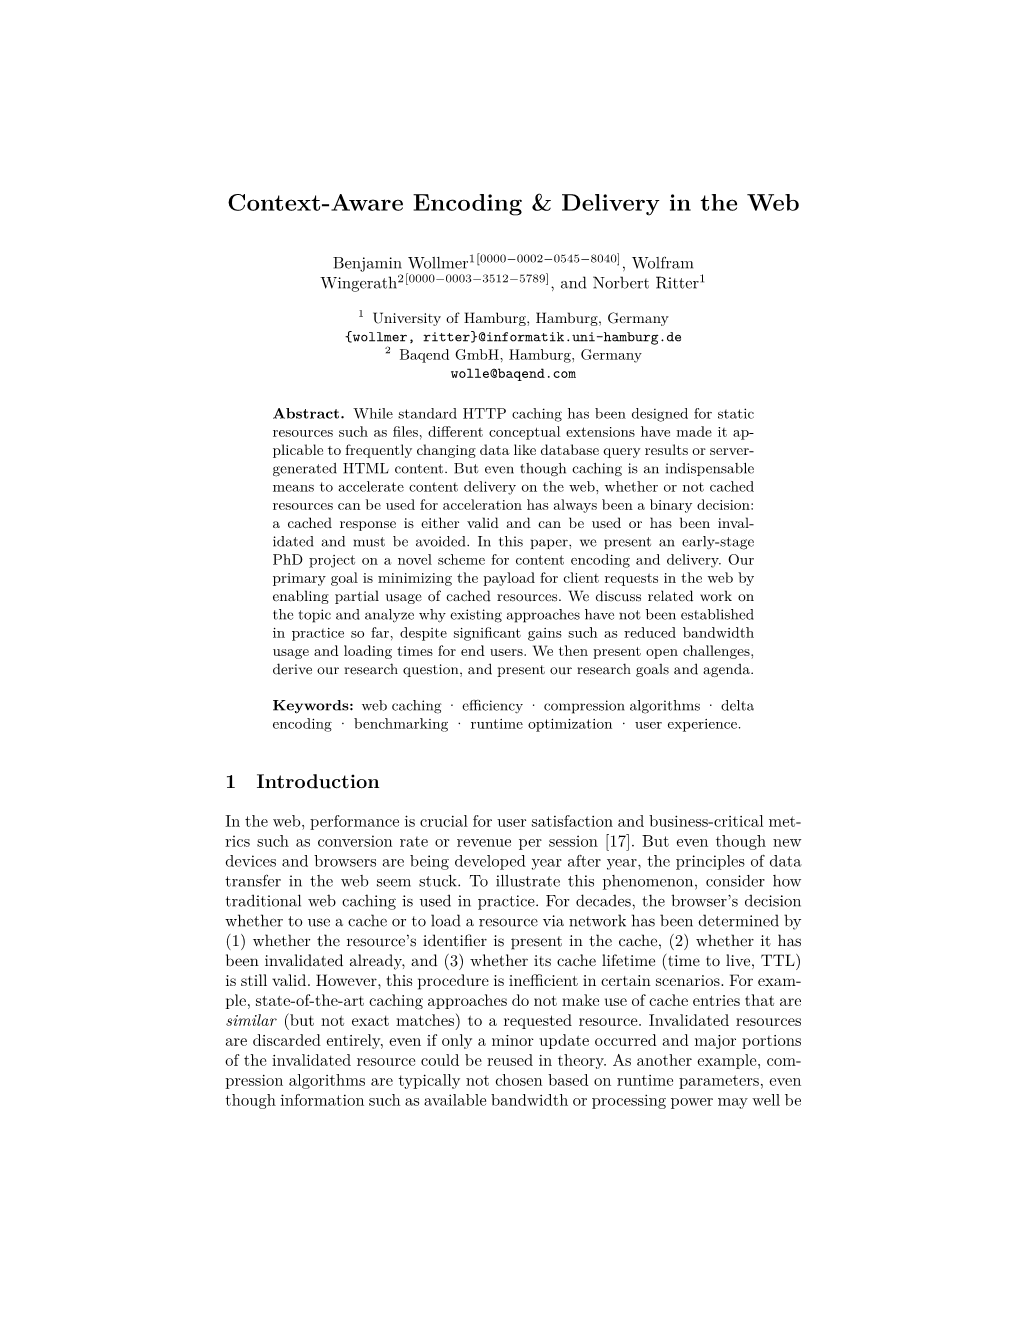 Context-Aware Encoding & Delivery in The